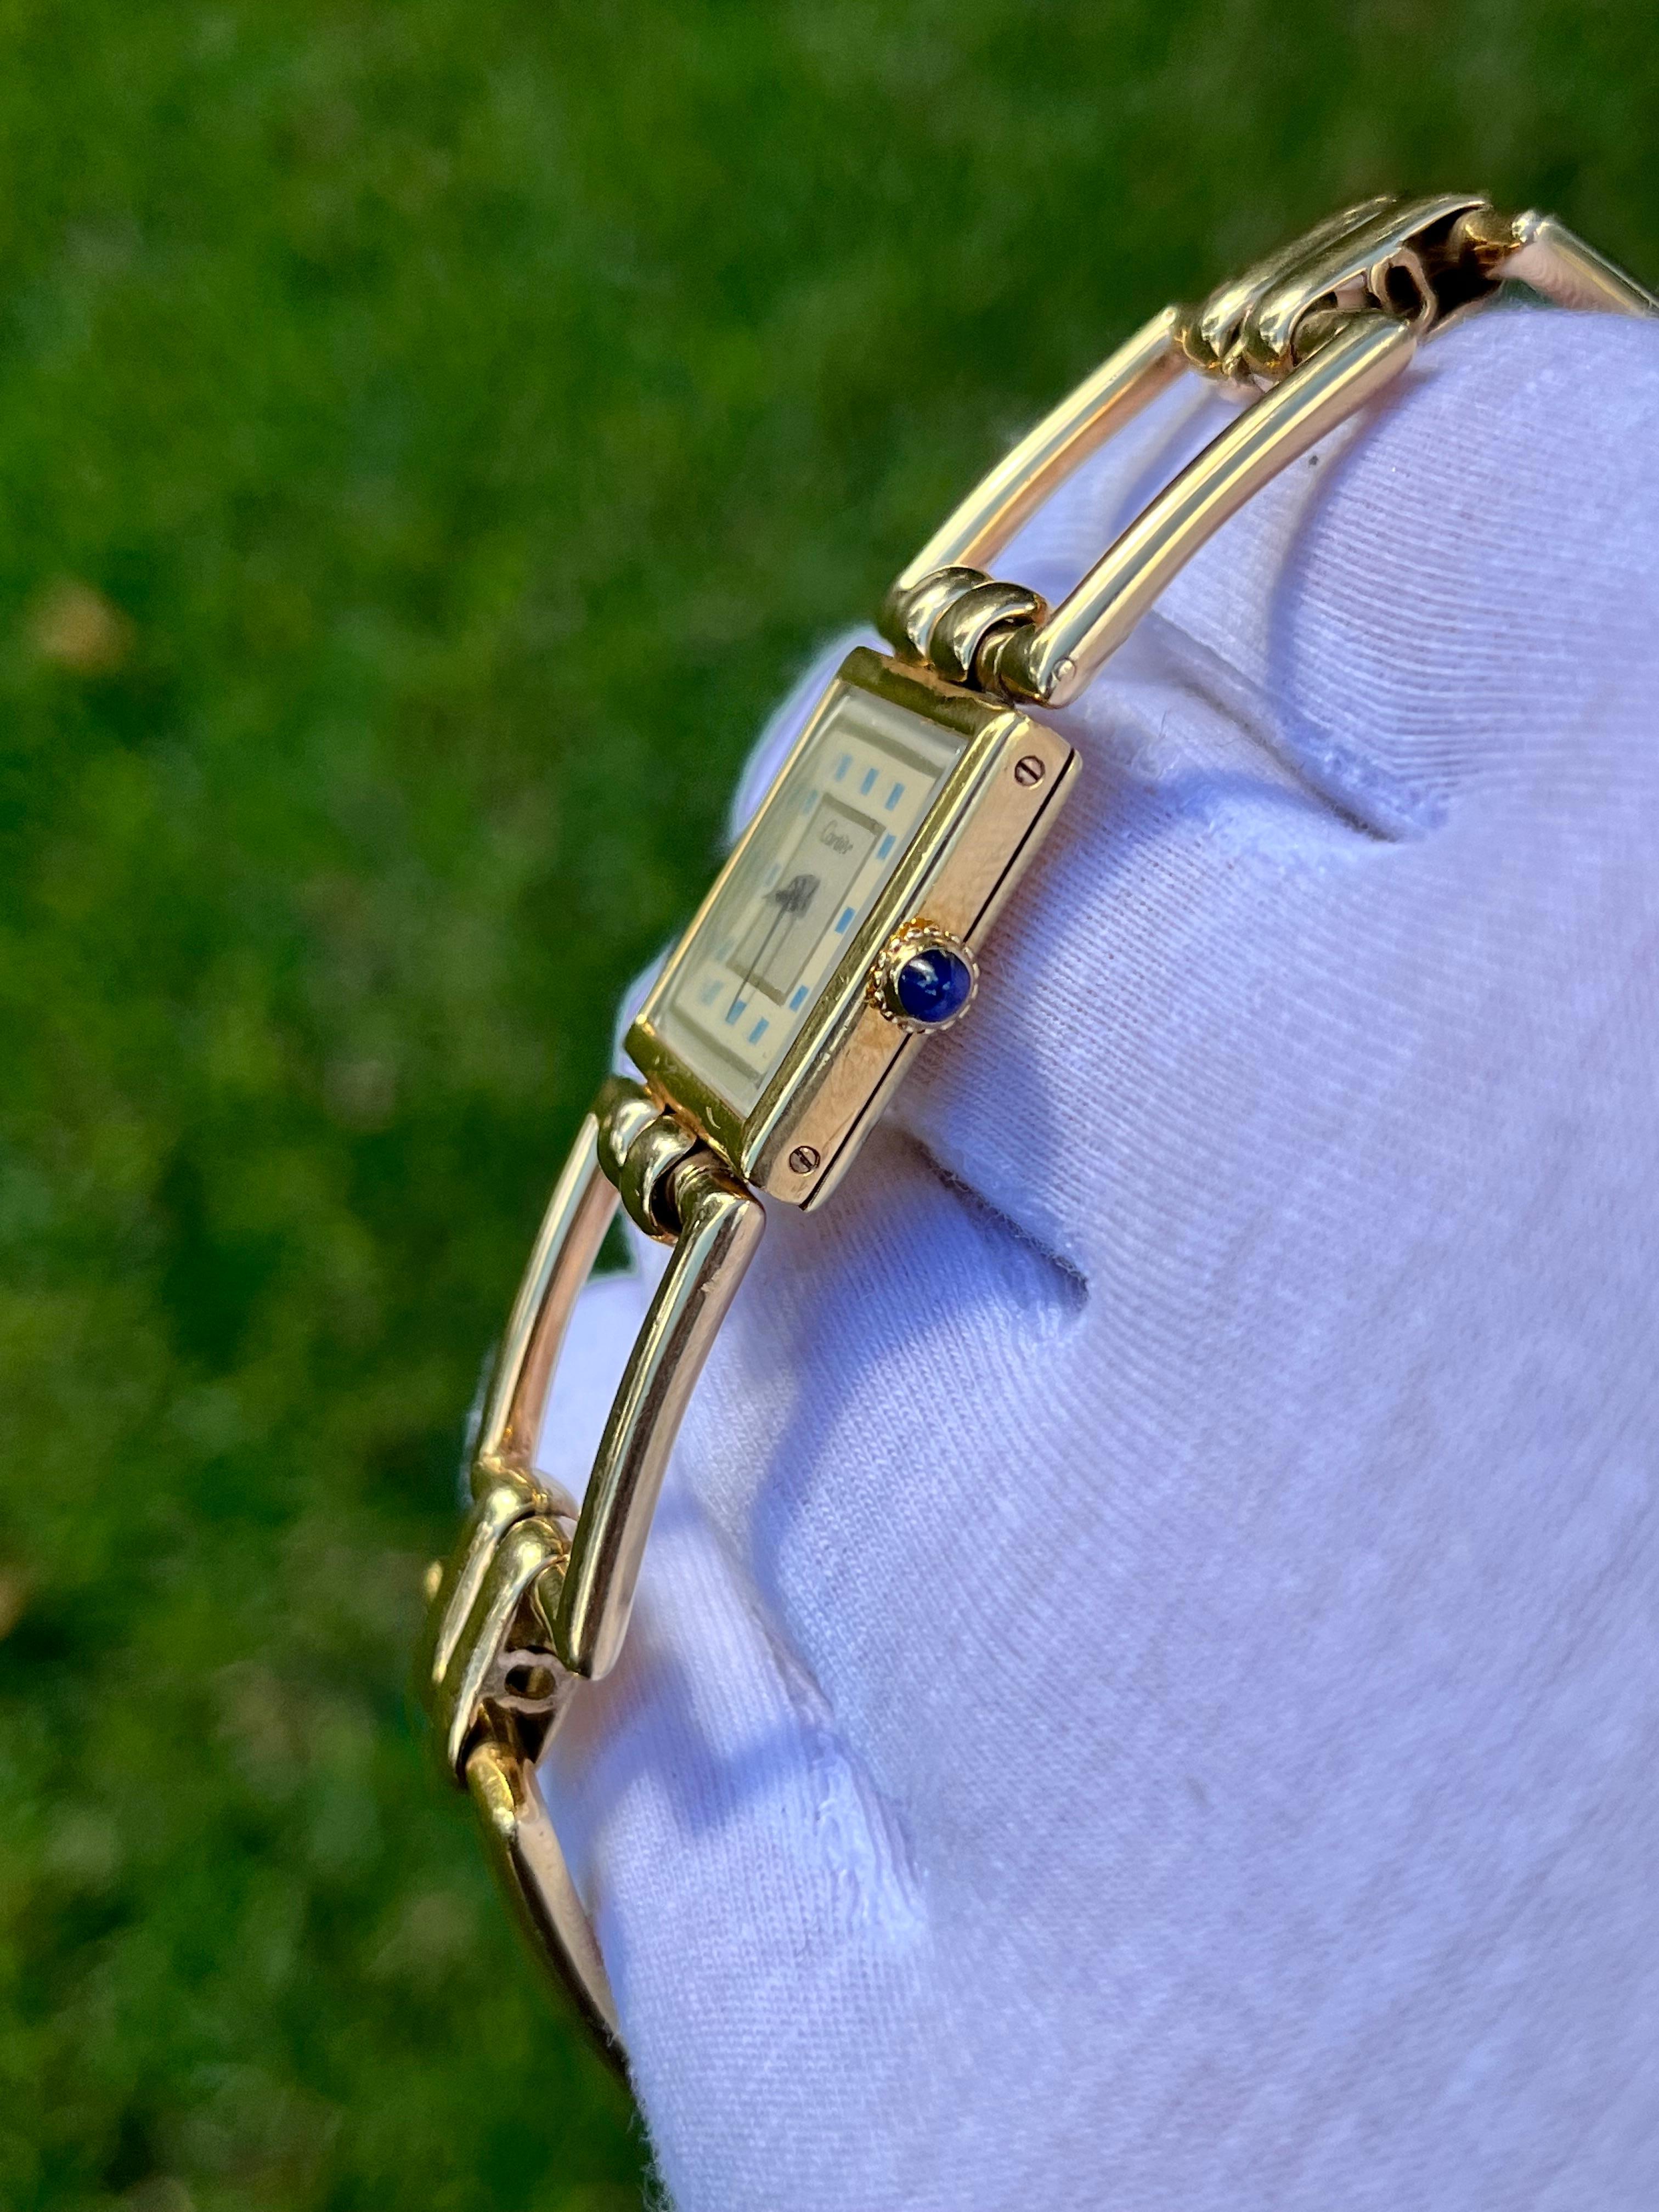 Vintage Cartier Square Link Watch in 14k gold - 21mm - Laides Cartier Watch 1